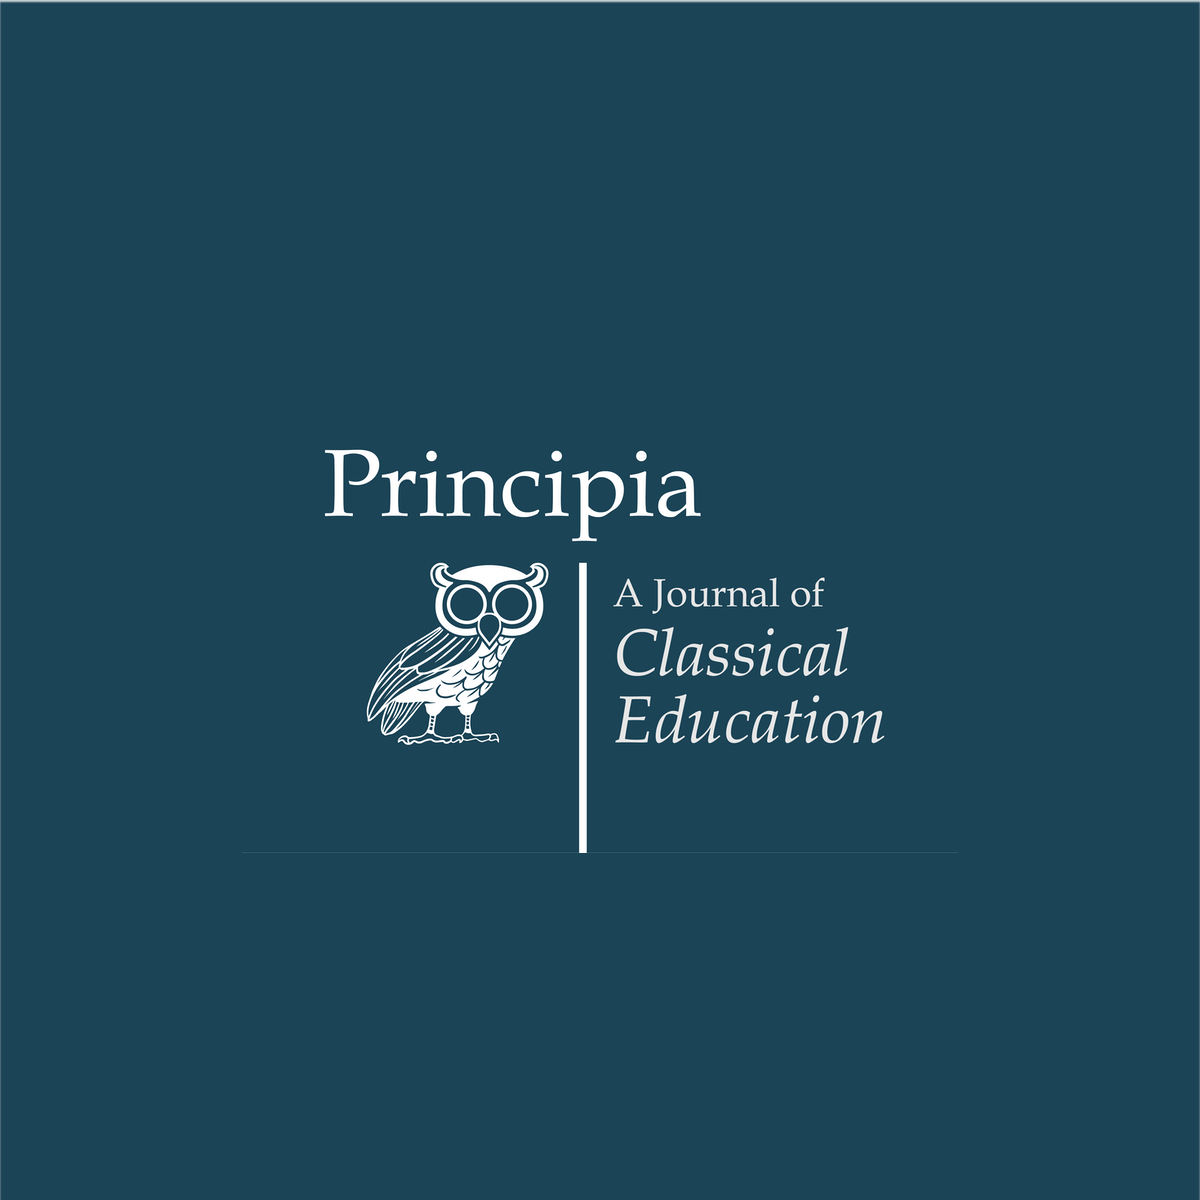 https://classicaleducationsymposium.org/wp-content/uploads/2022/03/Principia-Small.png